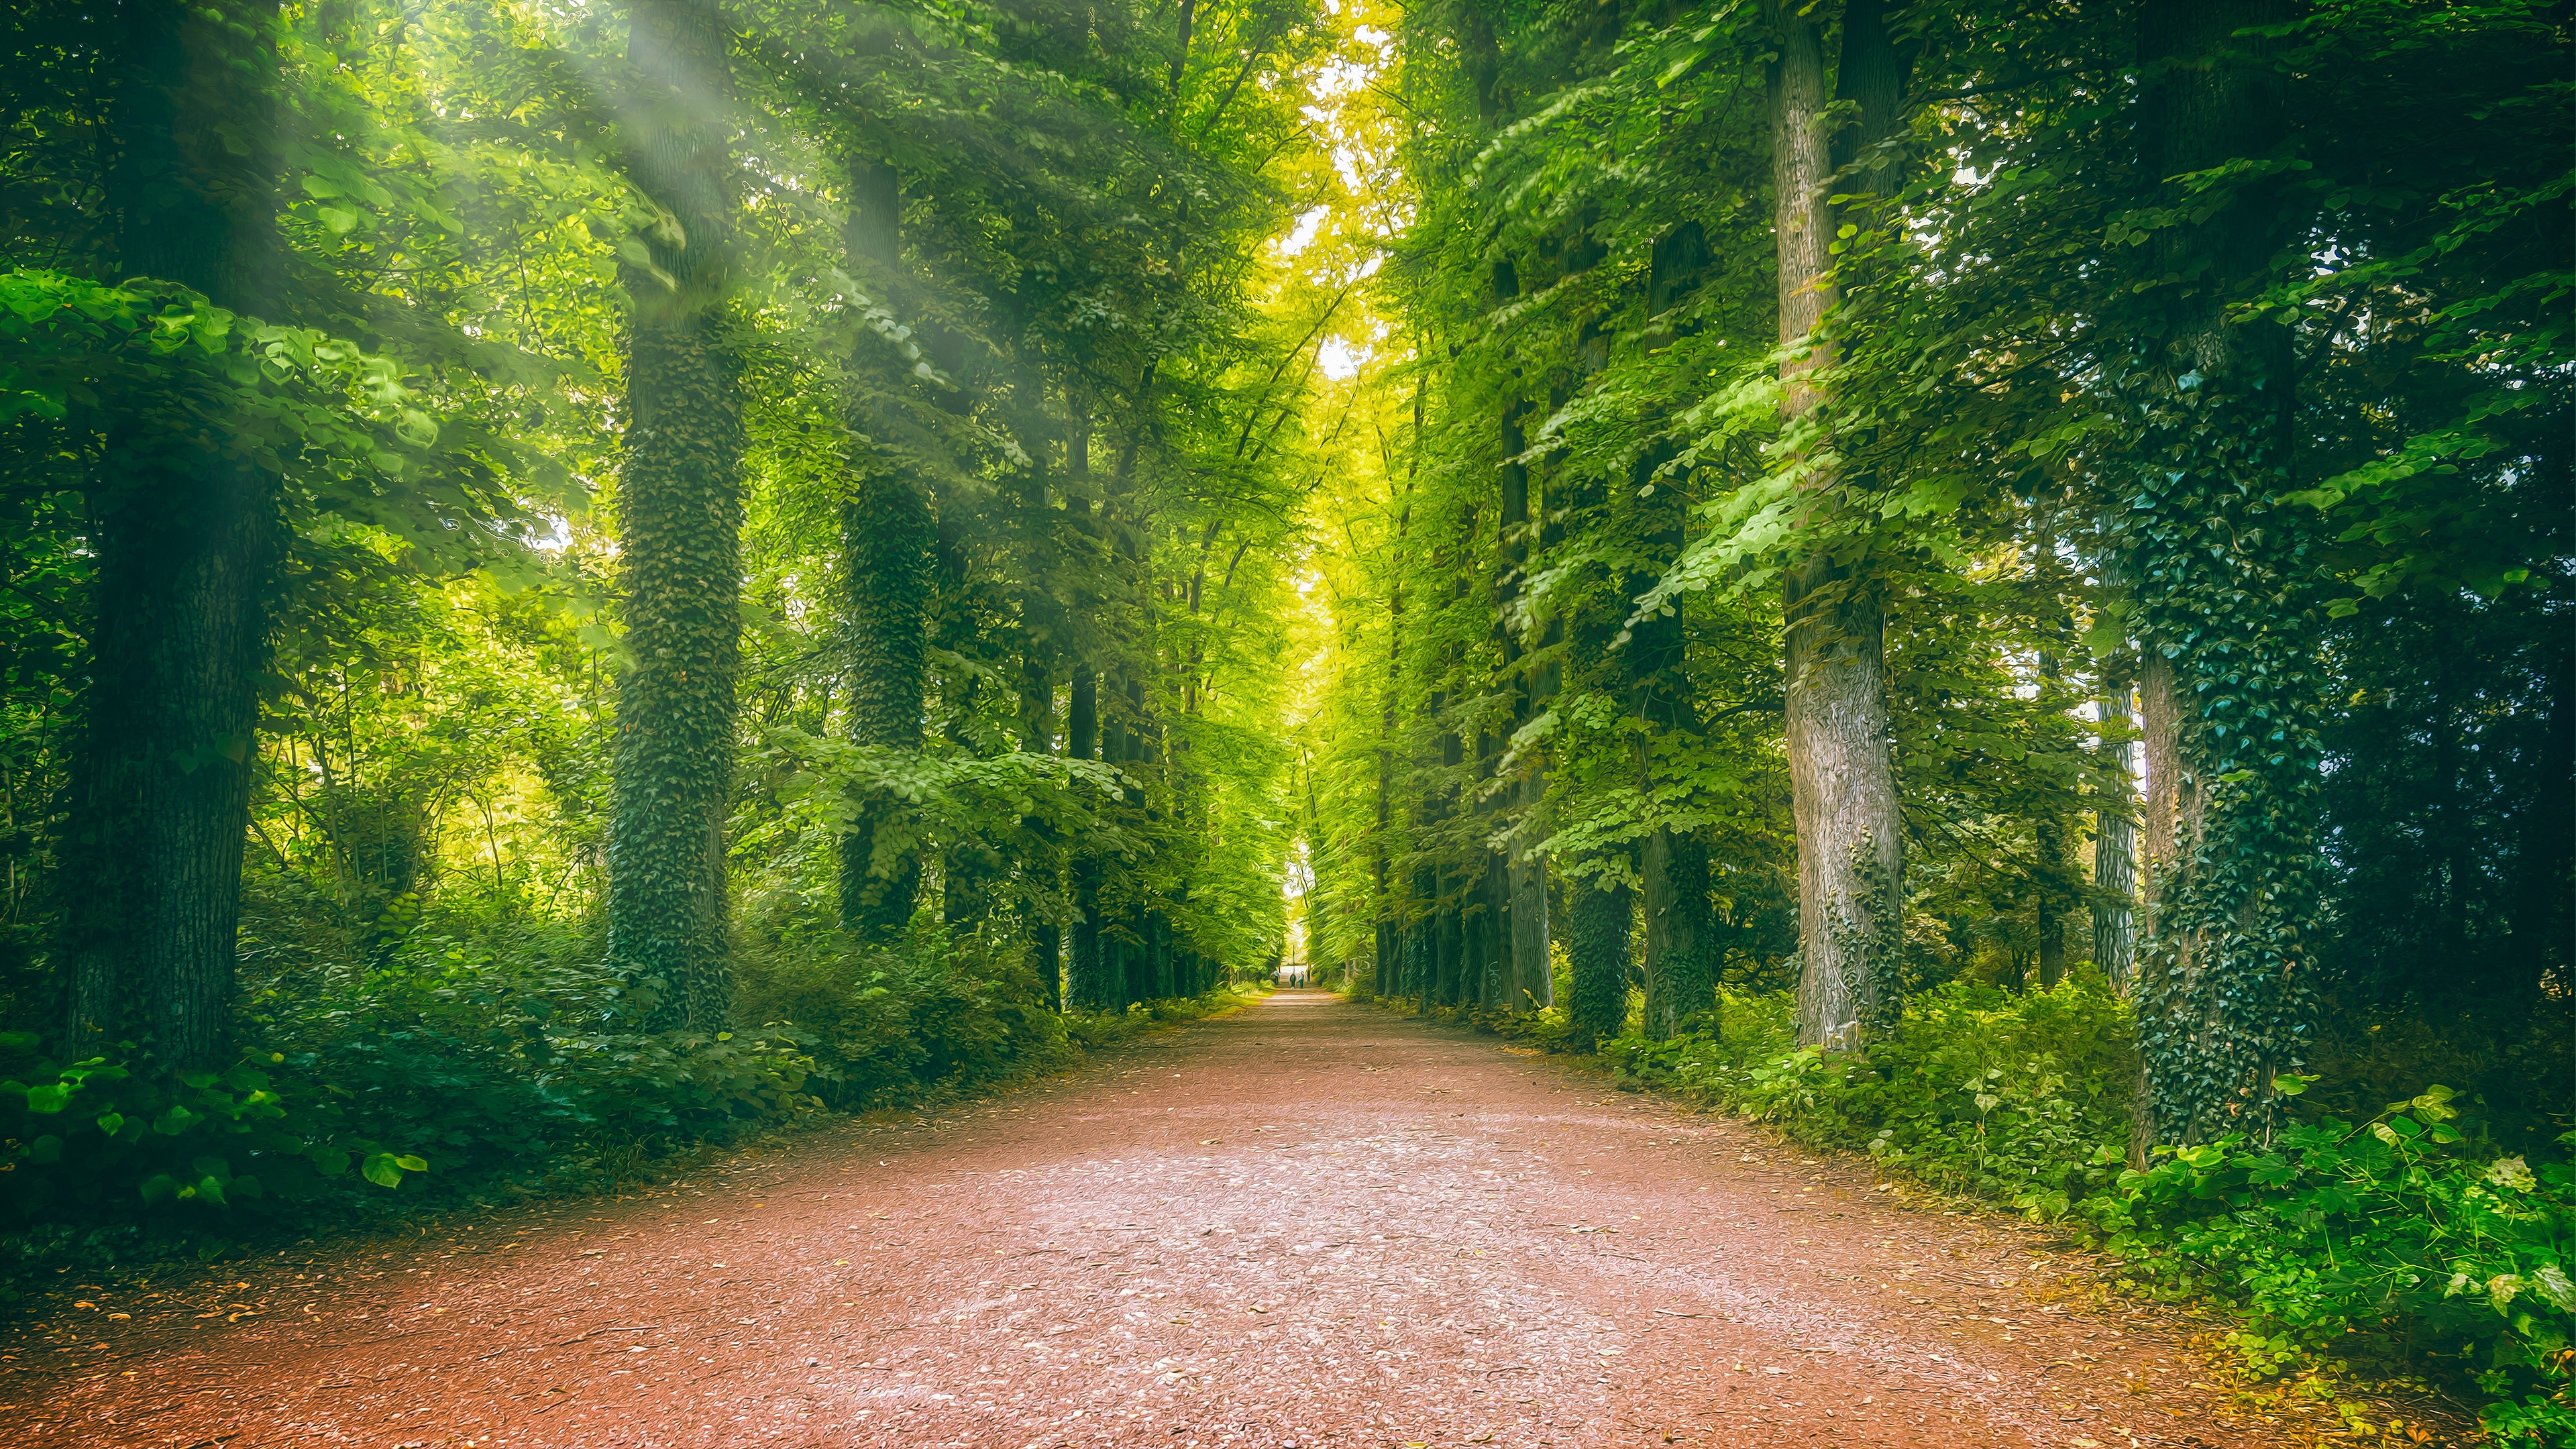 man made, road, forest, greenery, ivy, trunk